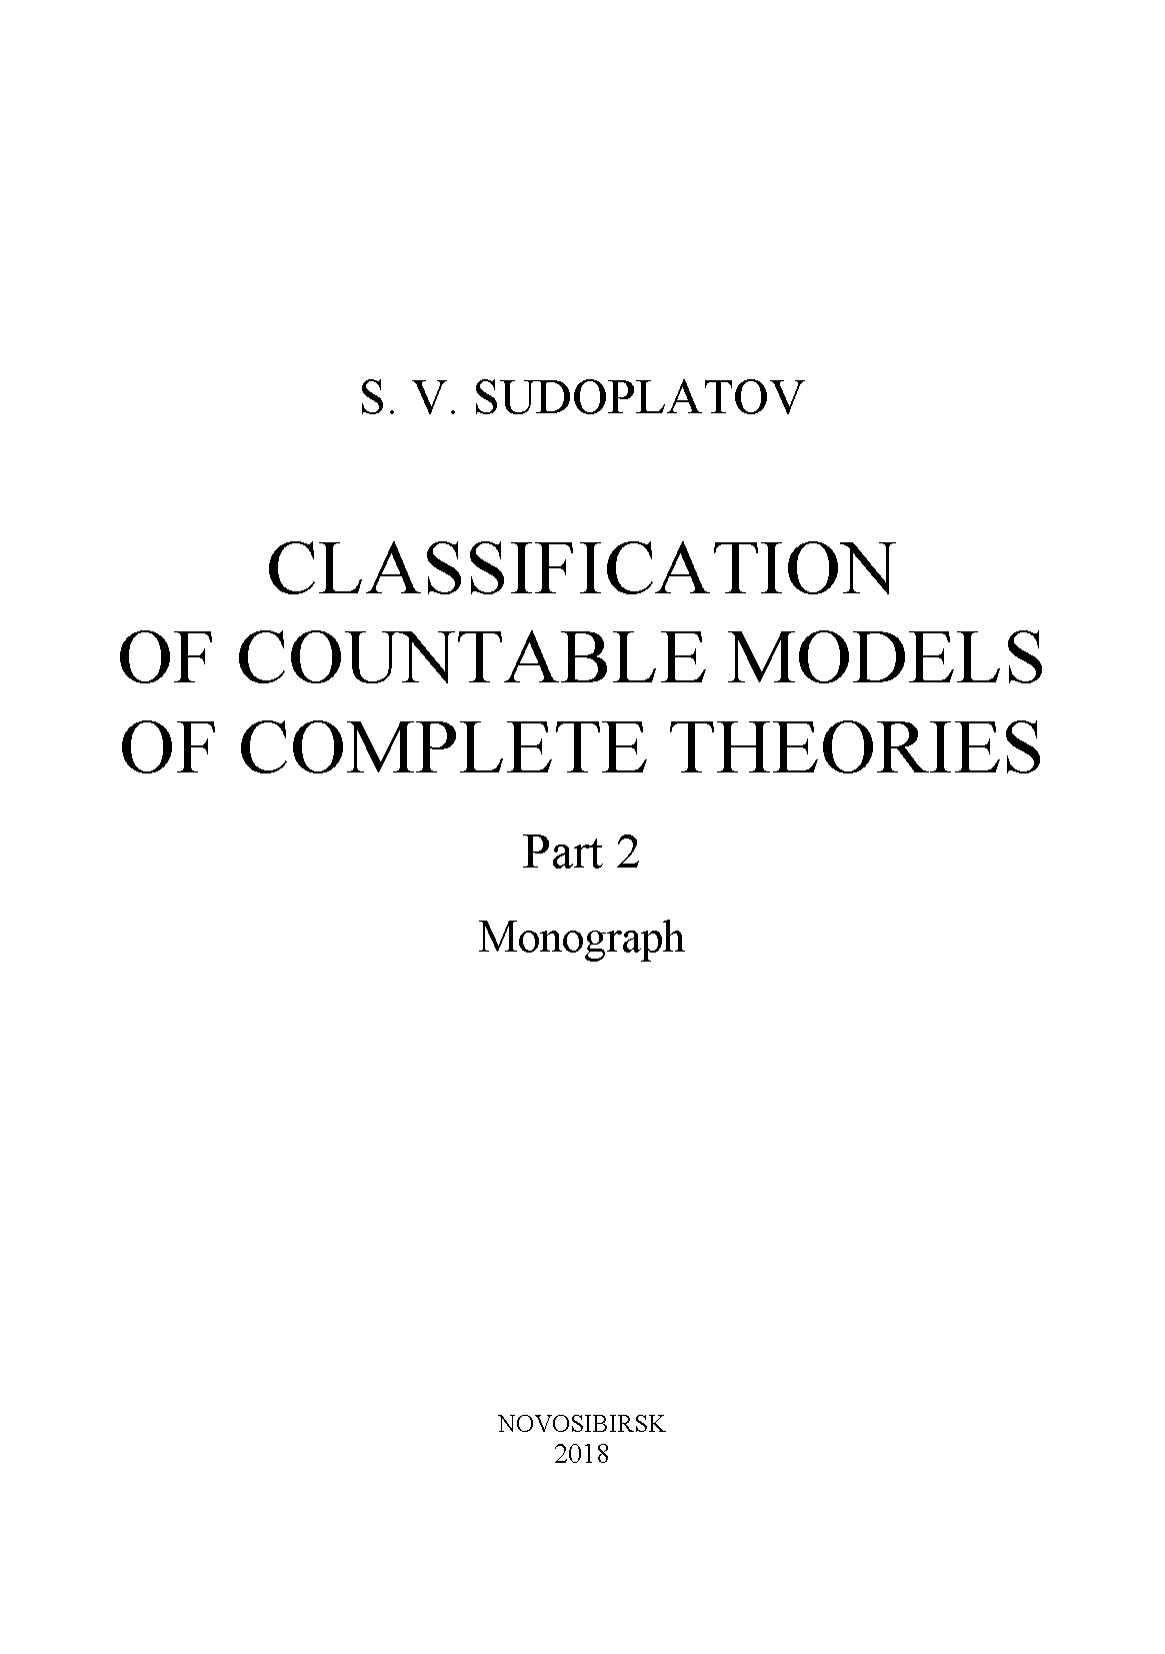 Classification of countable models of complete theories.Рart 2